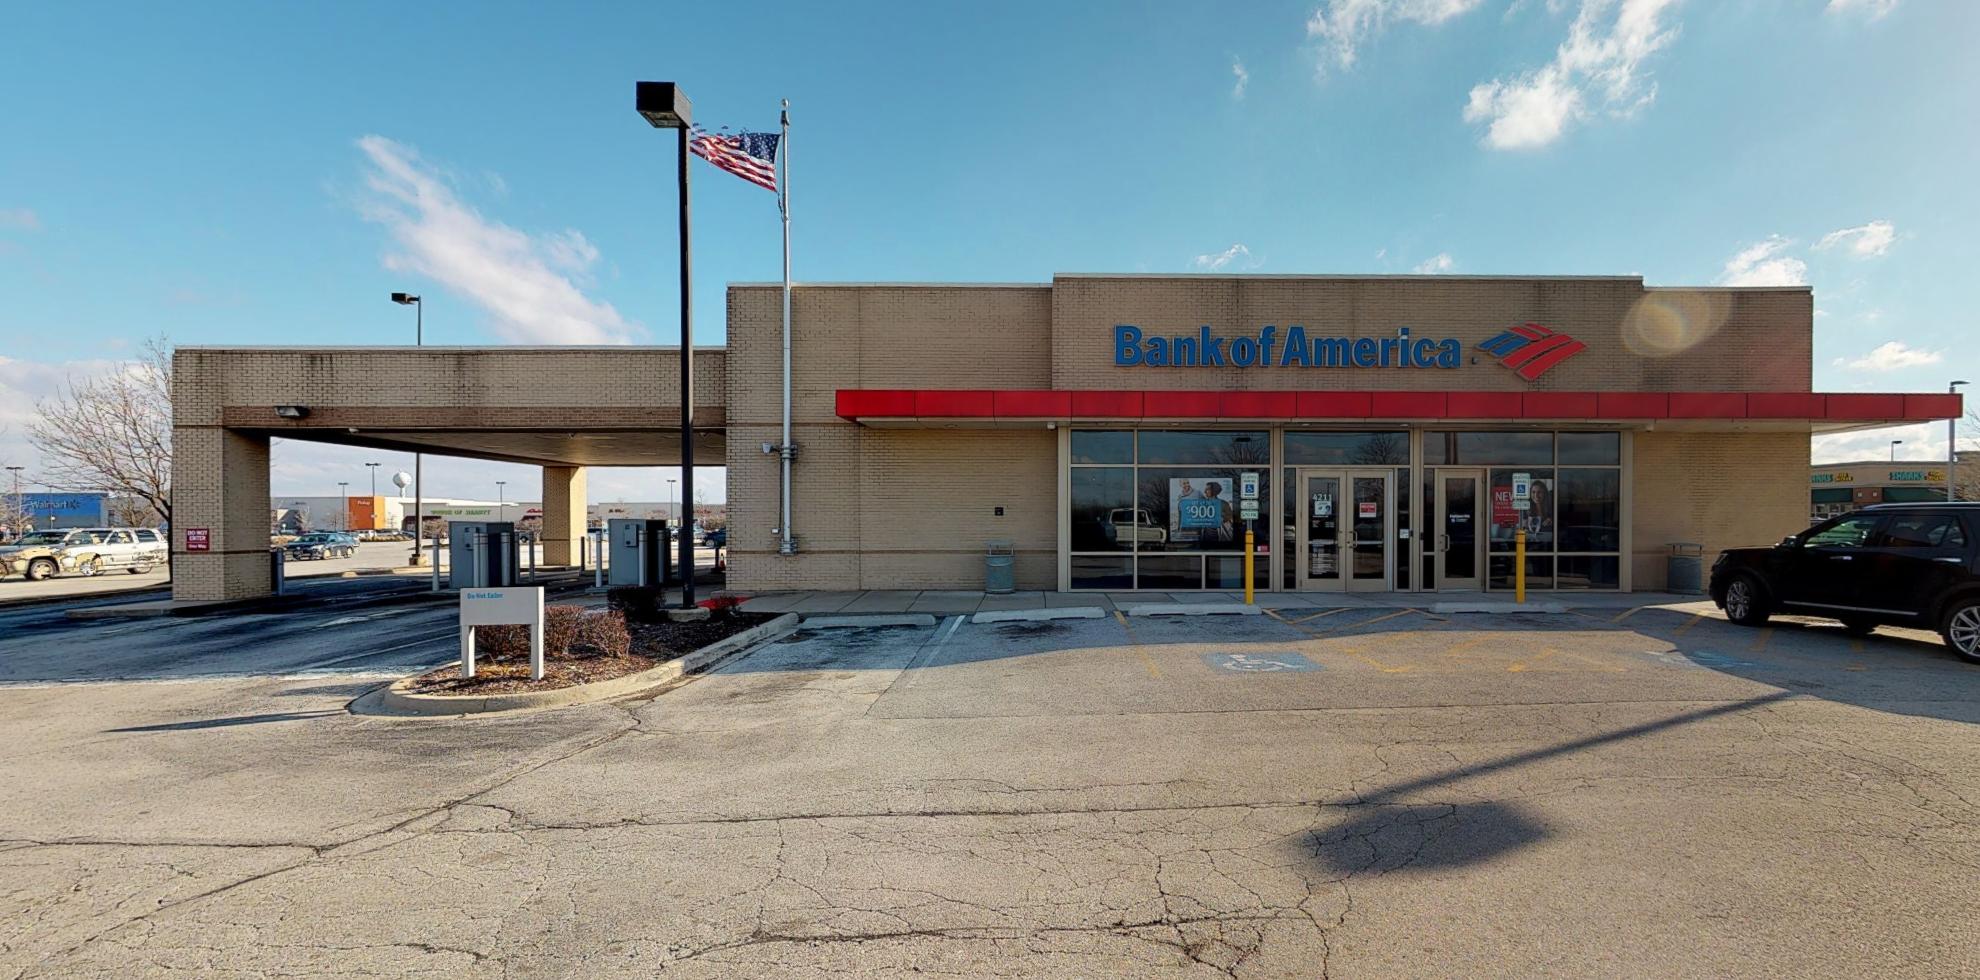 Bank of America financial center with drive-thru ATM | 4211 W 167th St, Country Club Hills, IL 60478